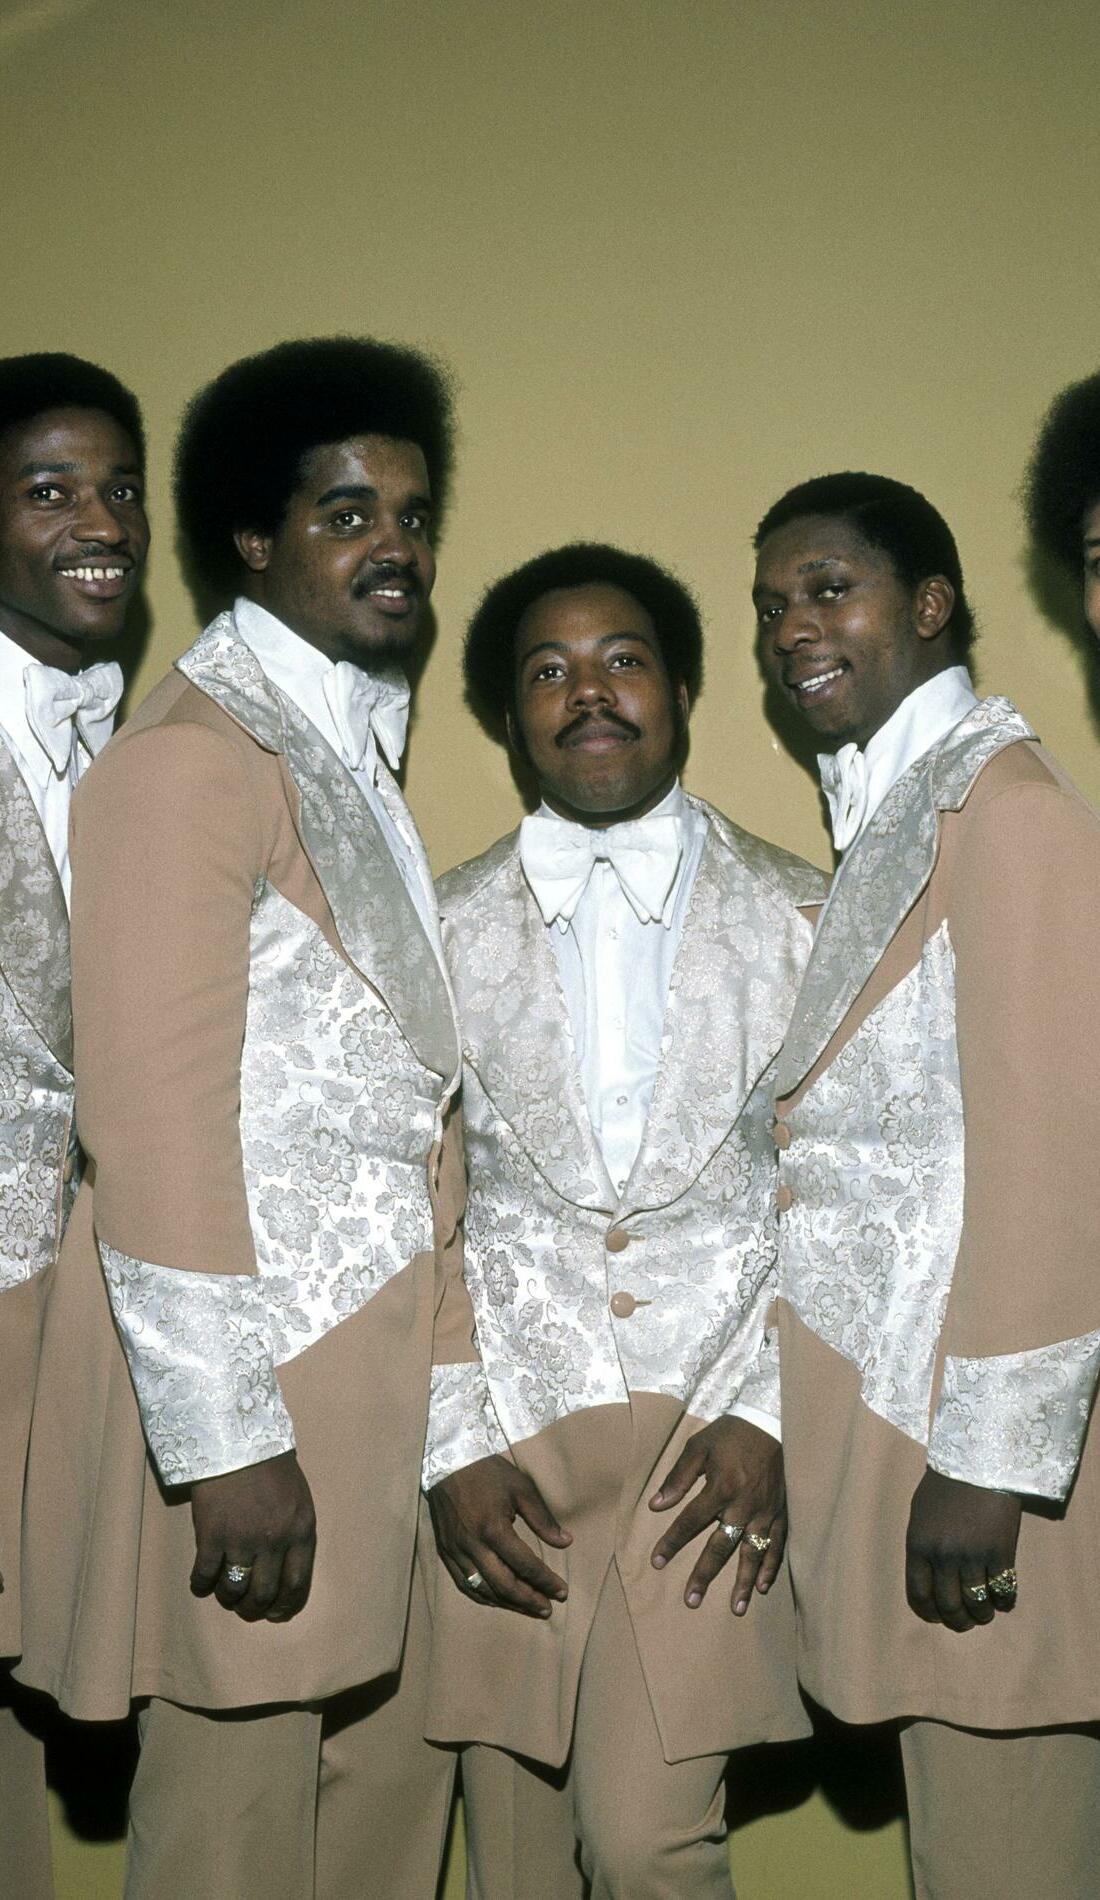 A The Stylistics live event